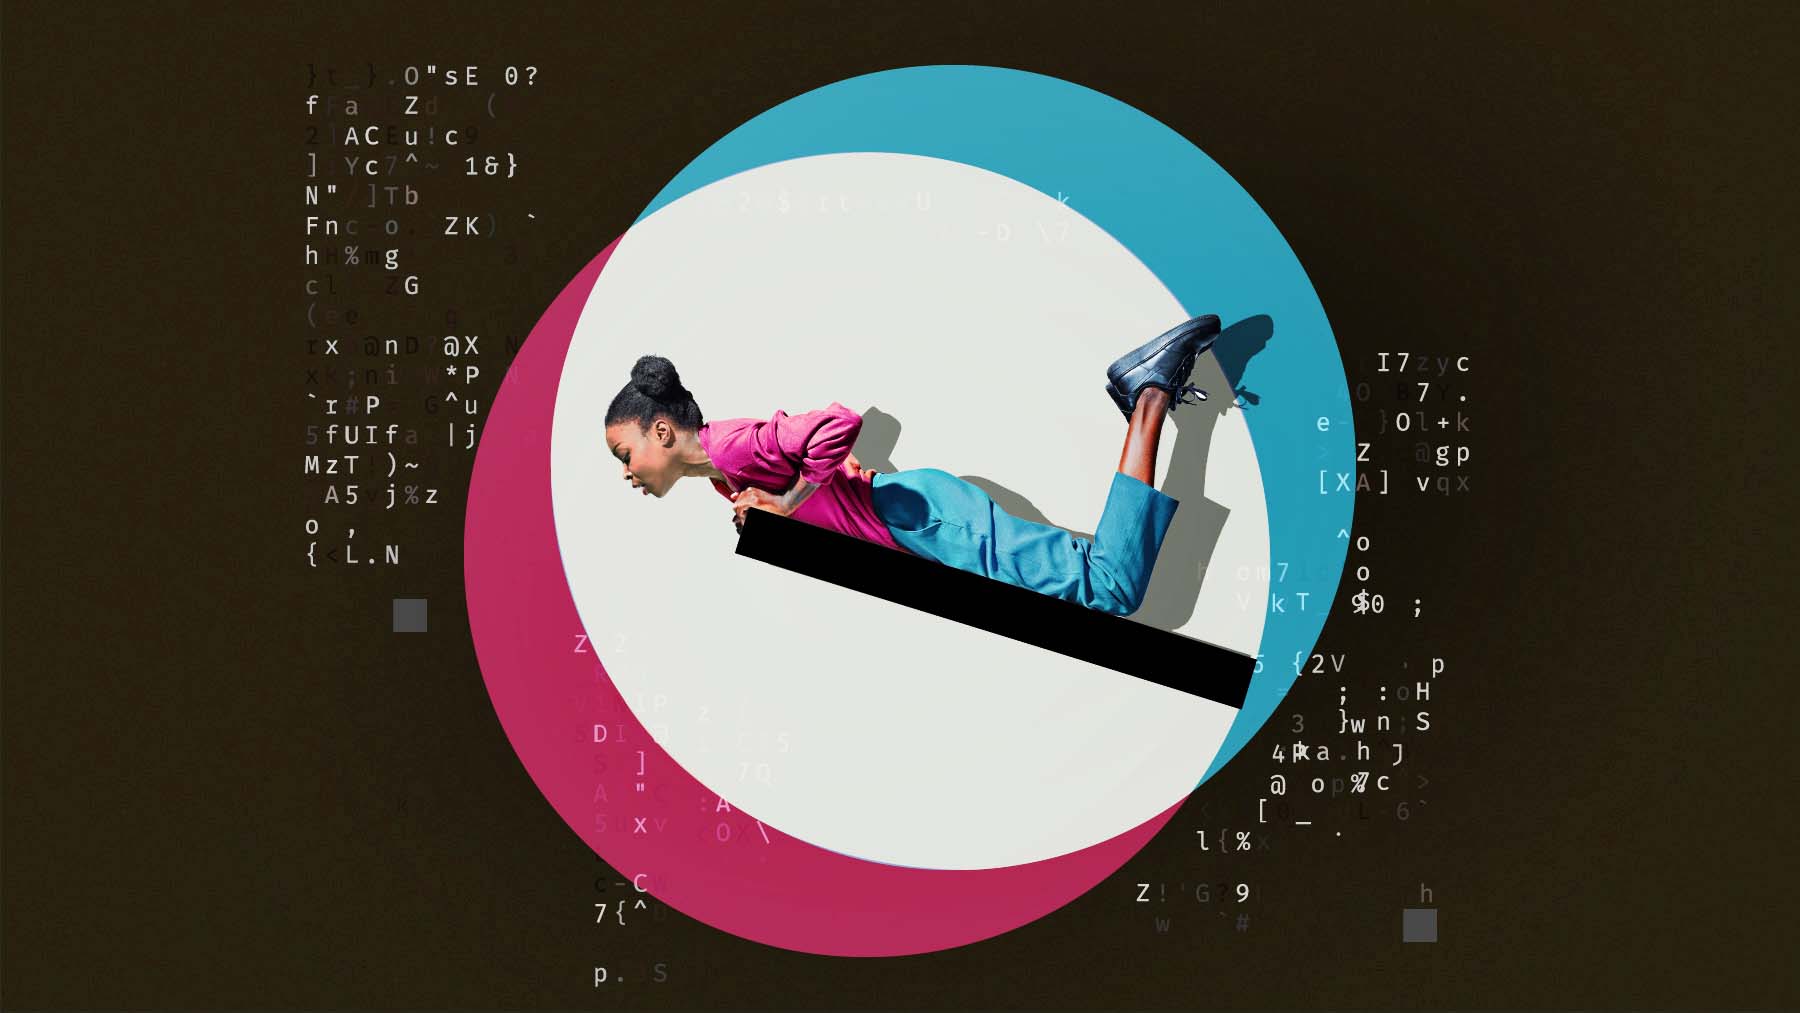 An illustration of a person resting on a rectangular shape tilted at an angle. They are looking down into a space filled with color and binary code.